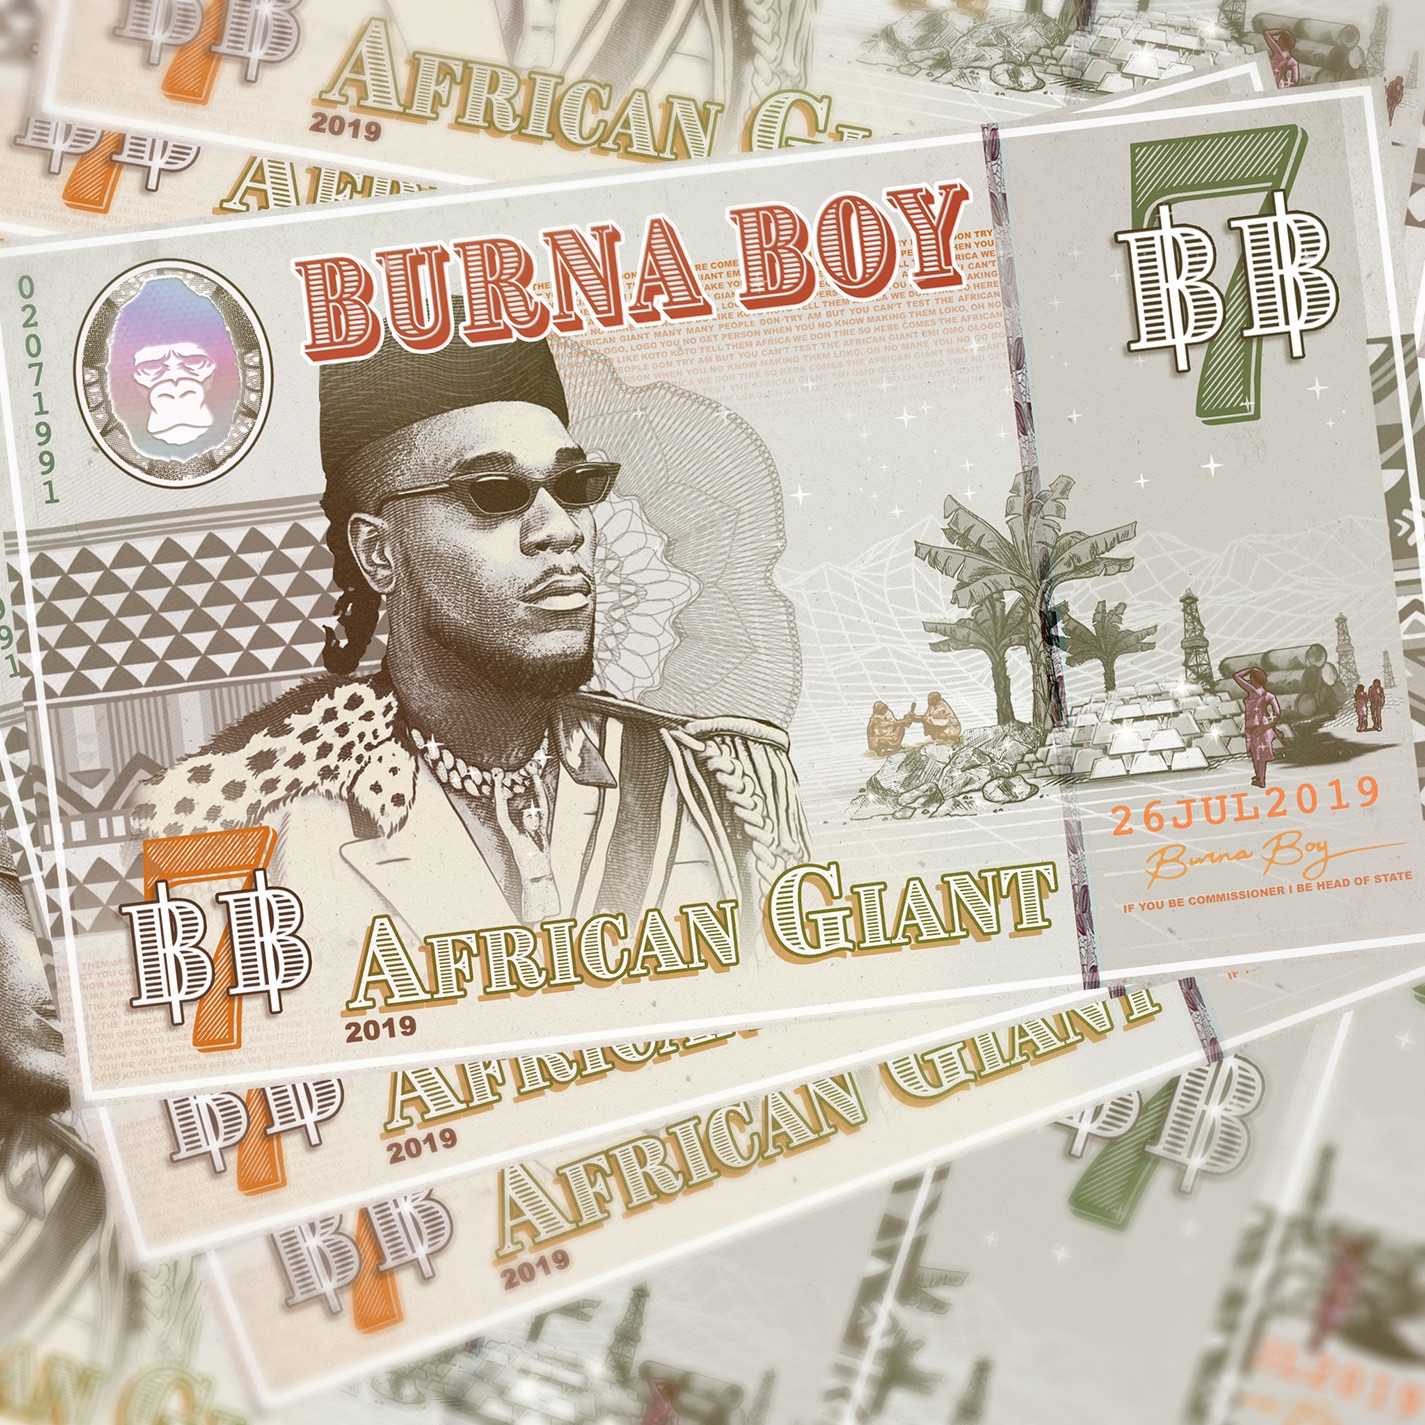 Art for African Giant by Burna Boy